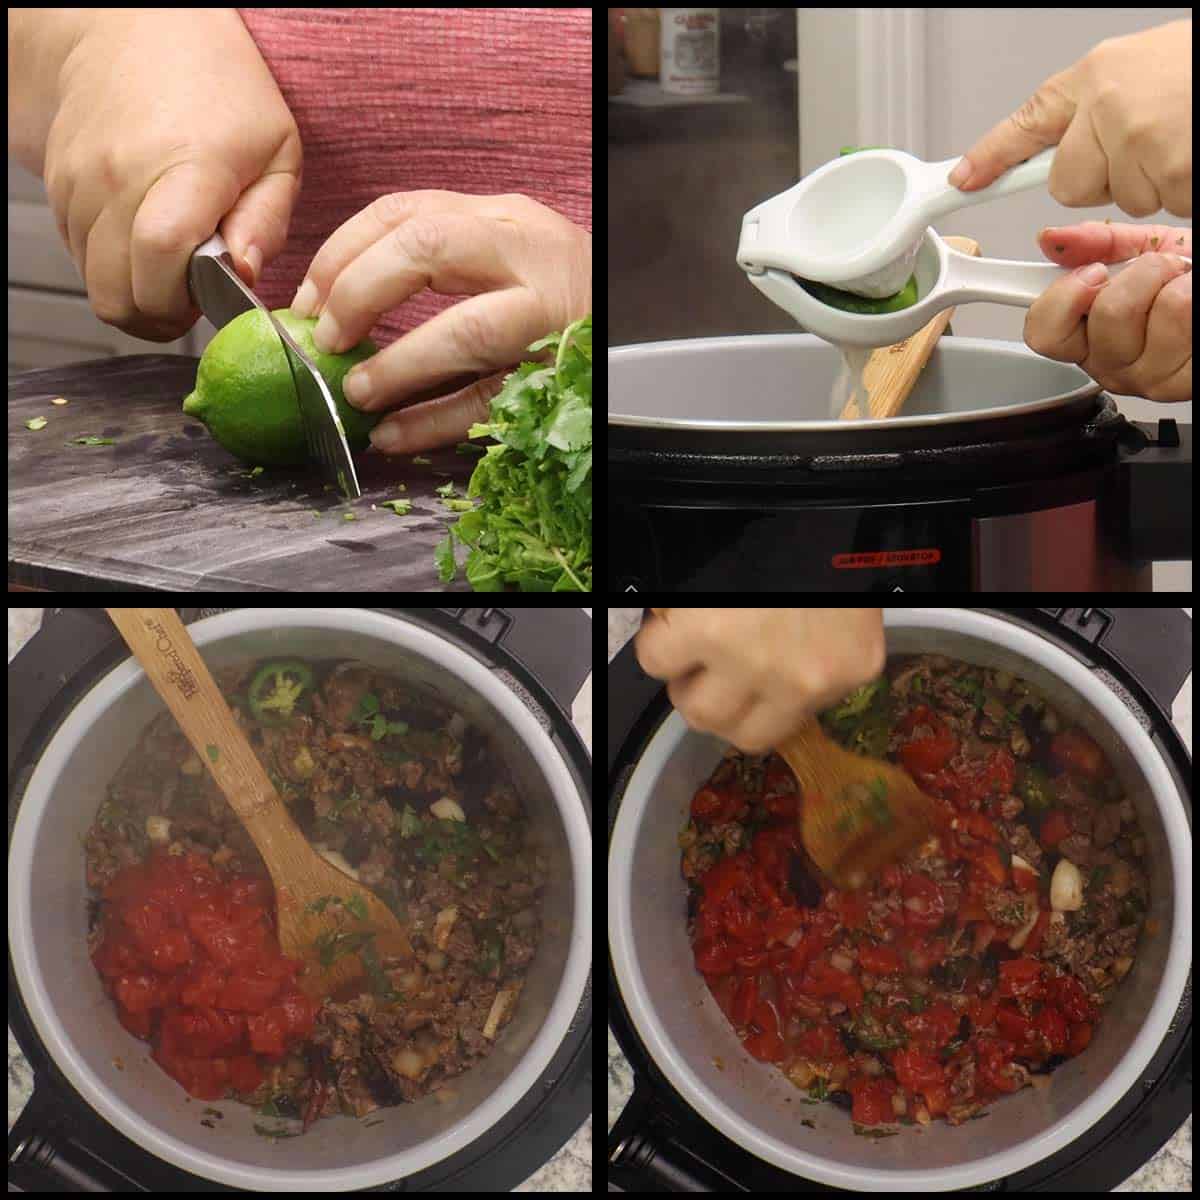 juicing lime and adding canned tomatoes before pressure cooking the carne picada.